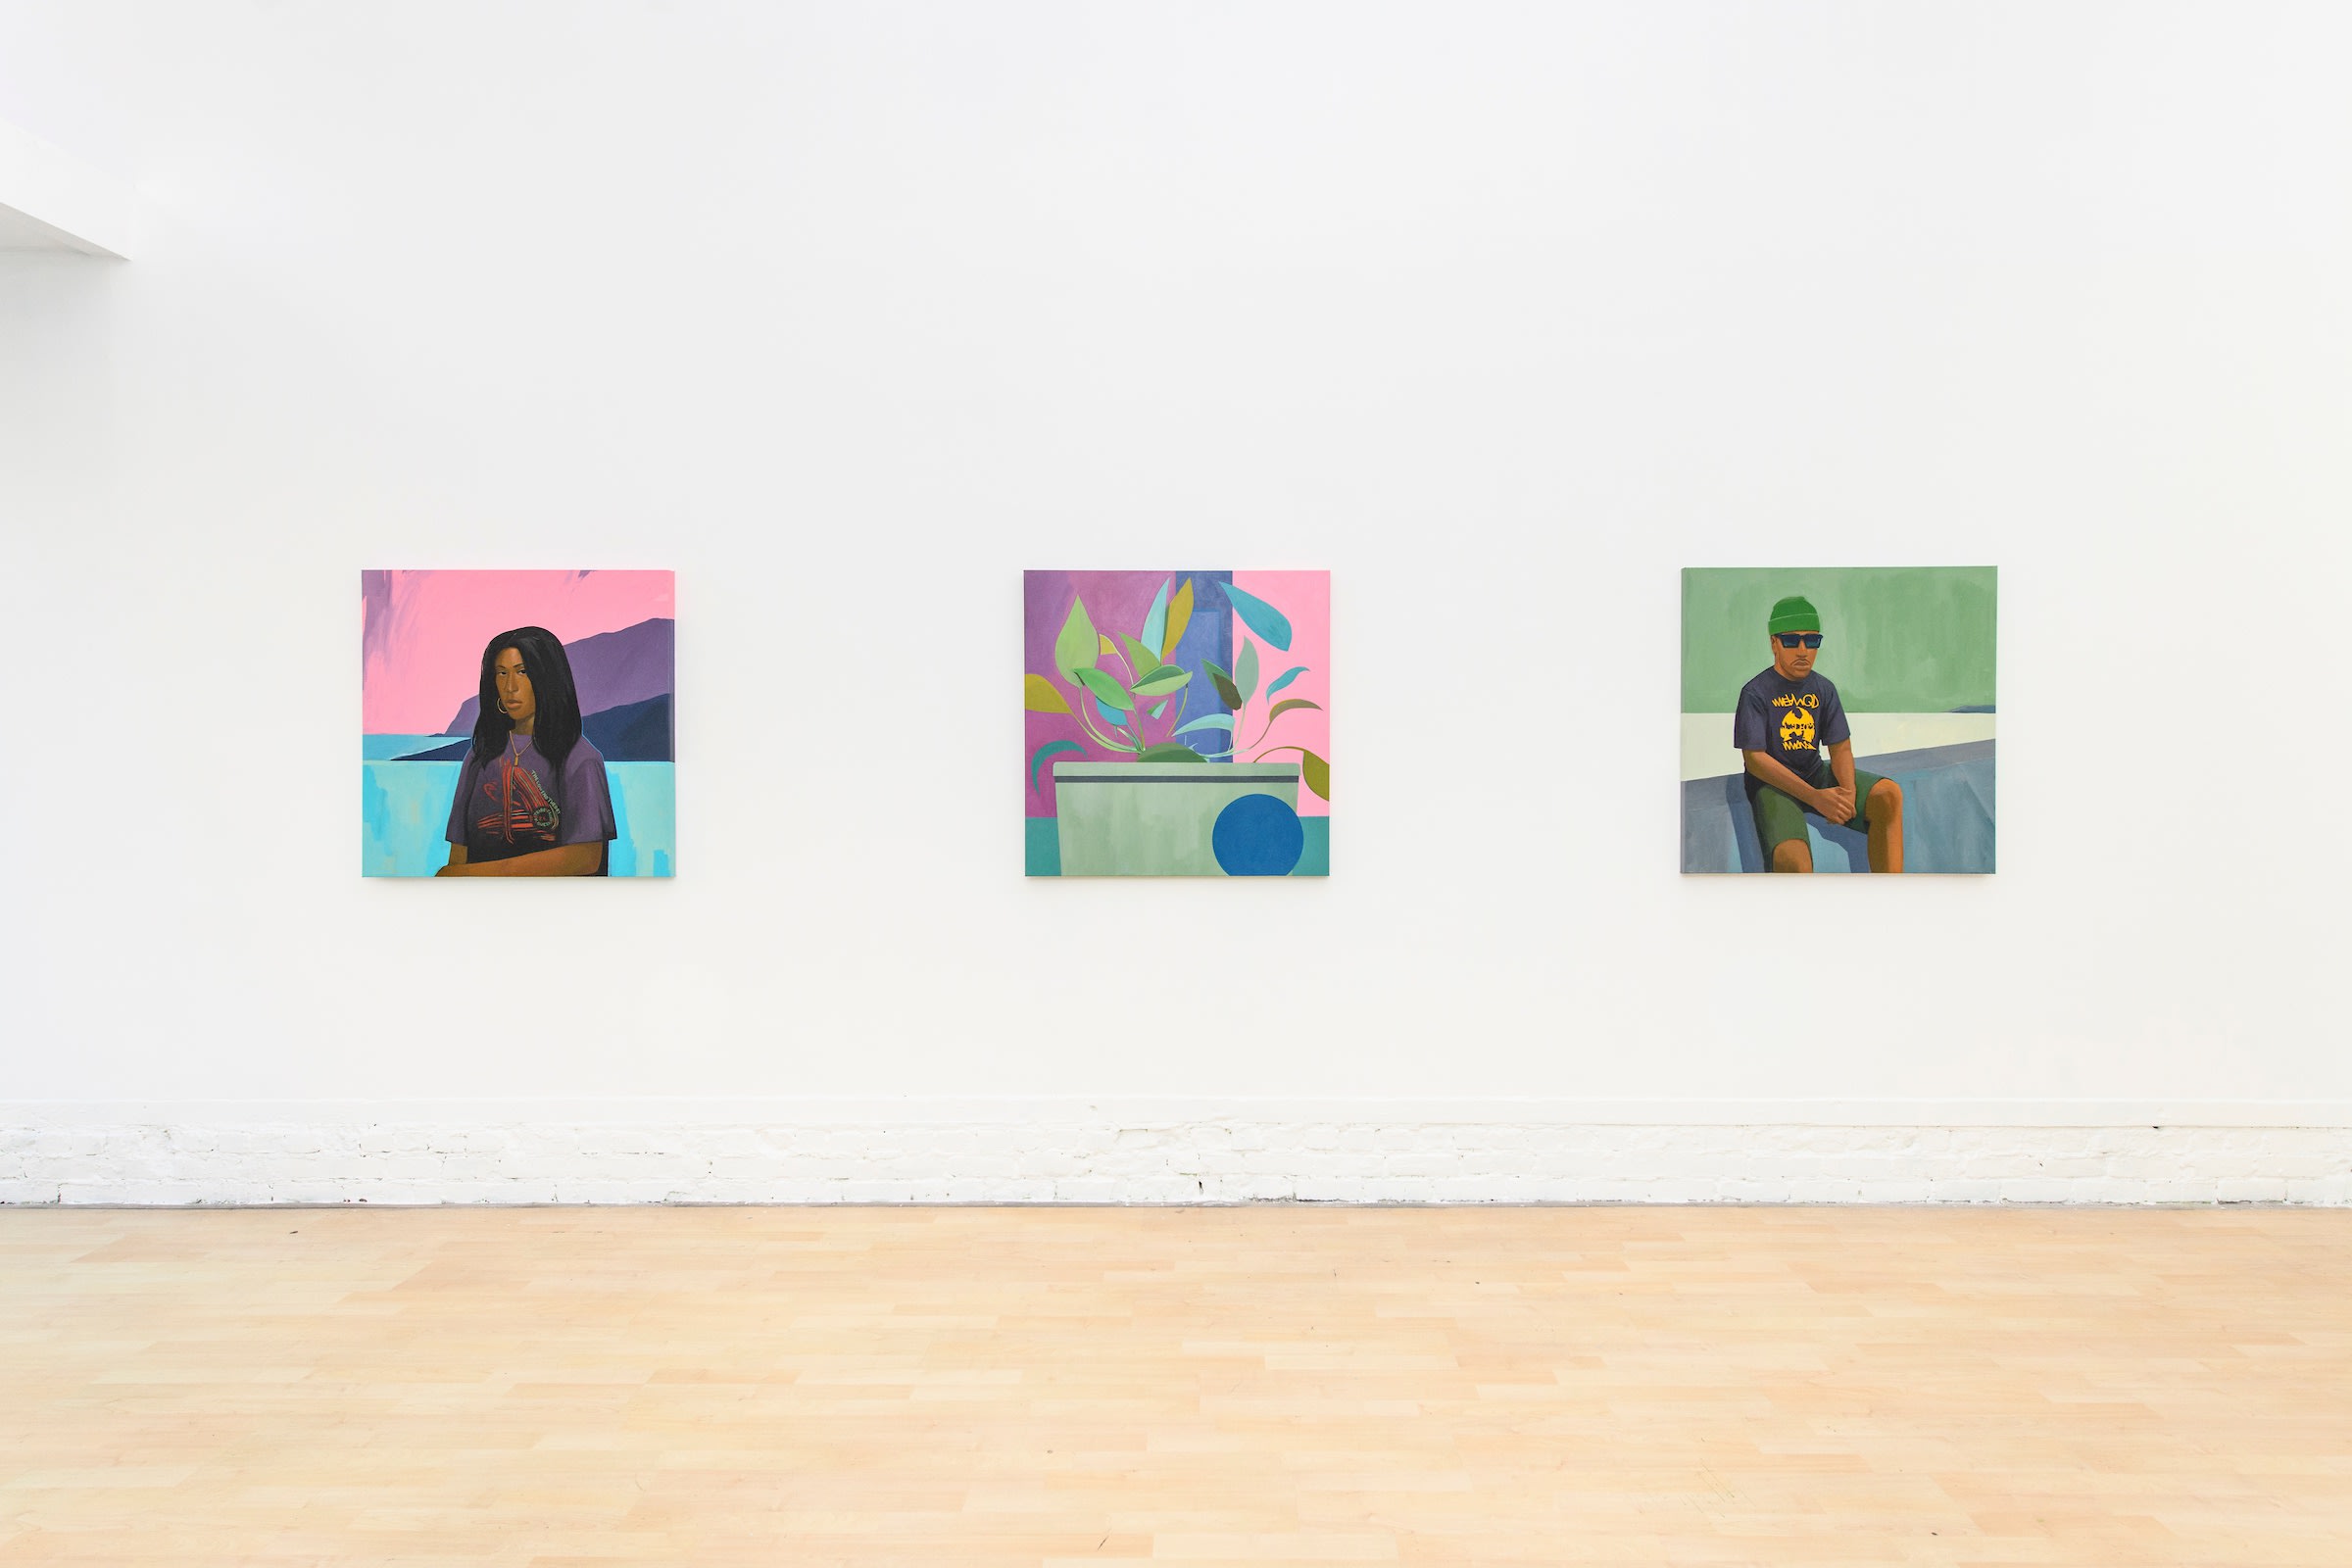 installation view of Dennis Brown's show at Hashimoto Contemporary